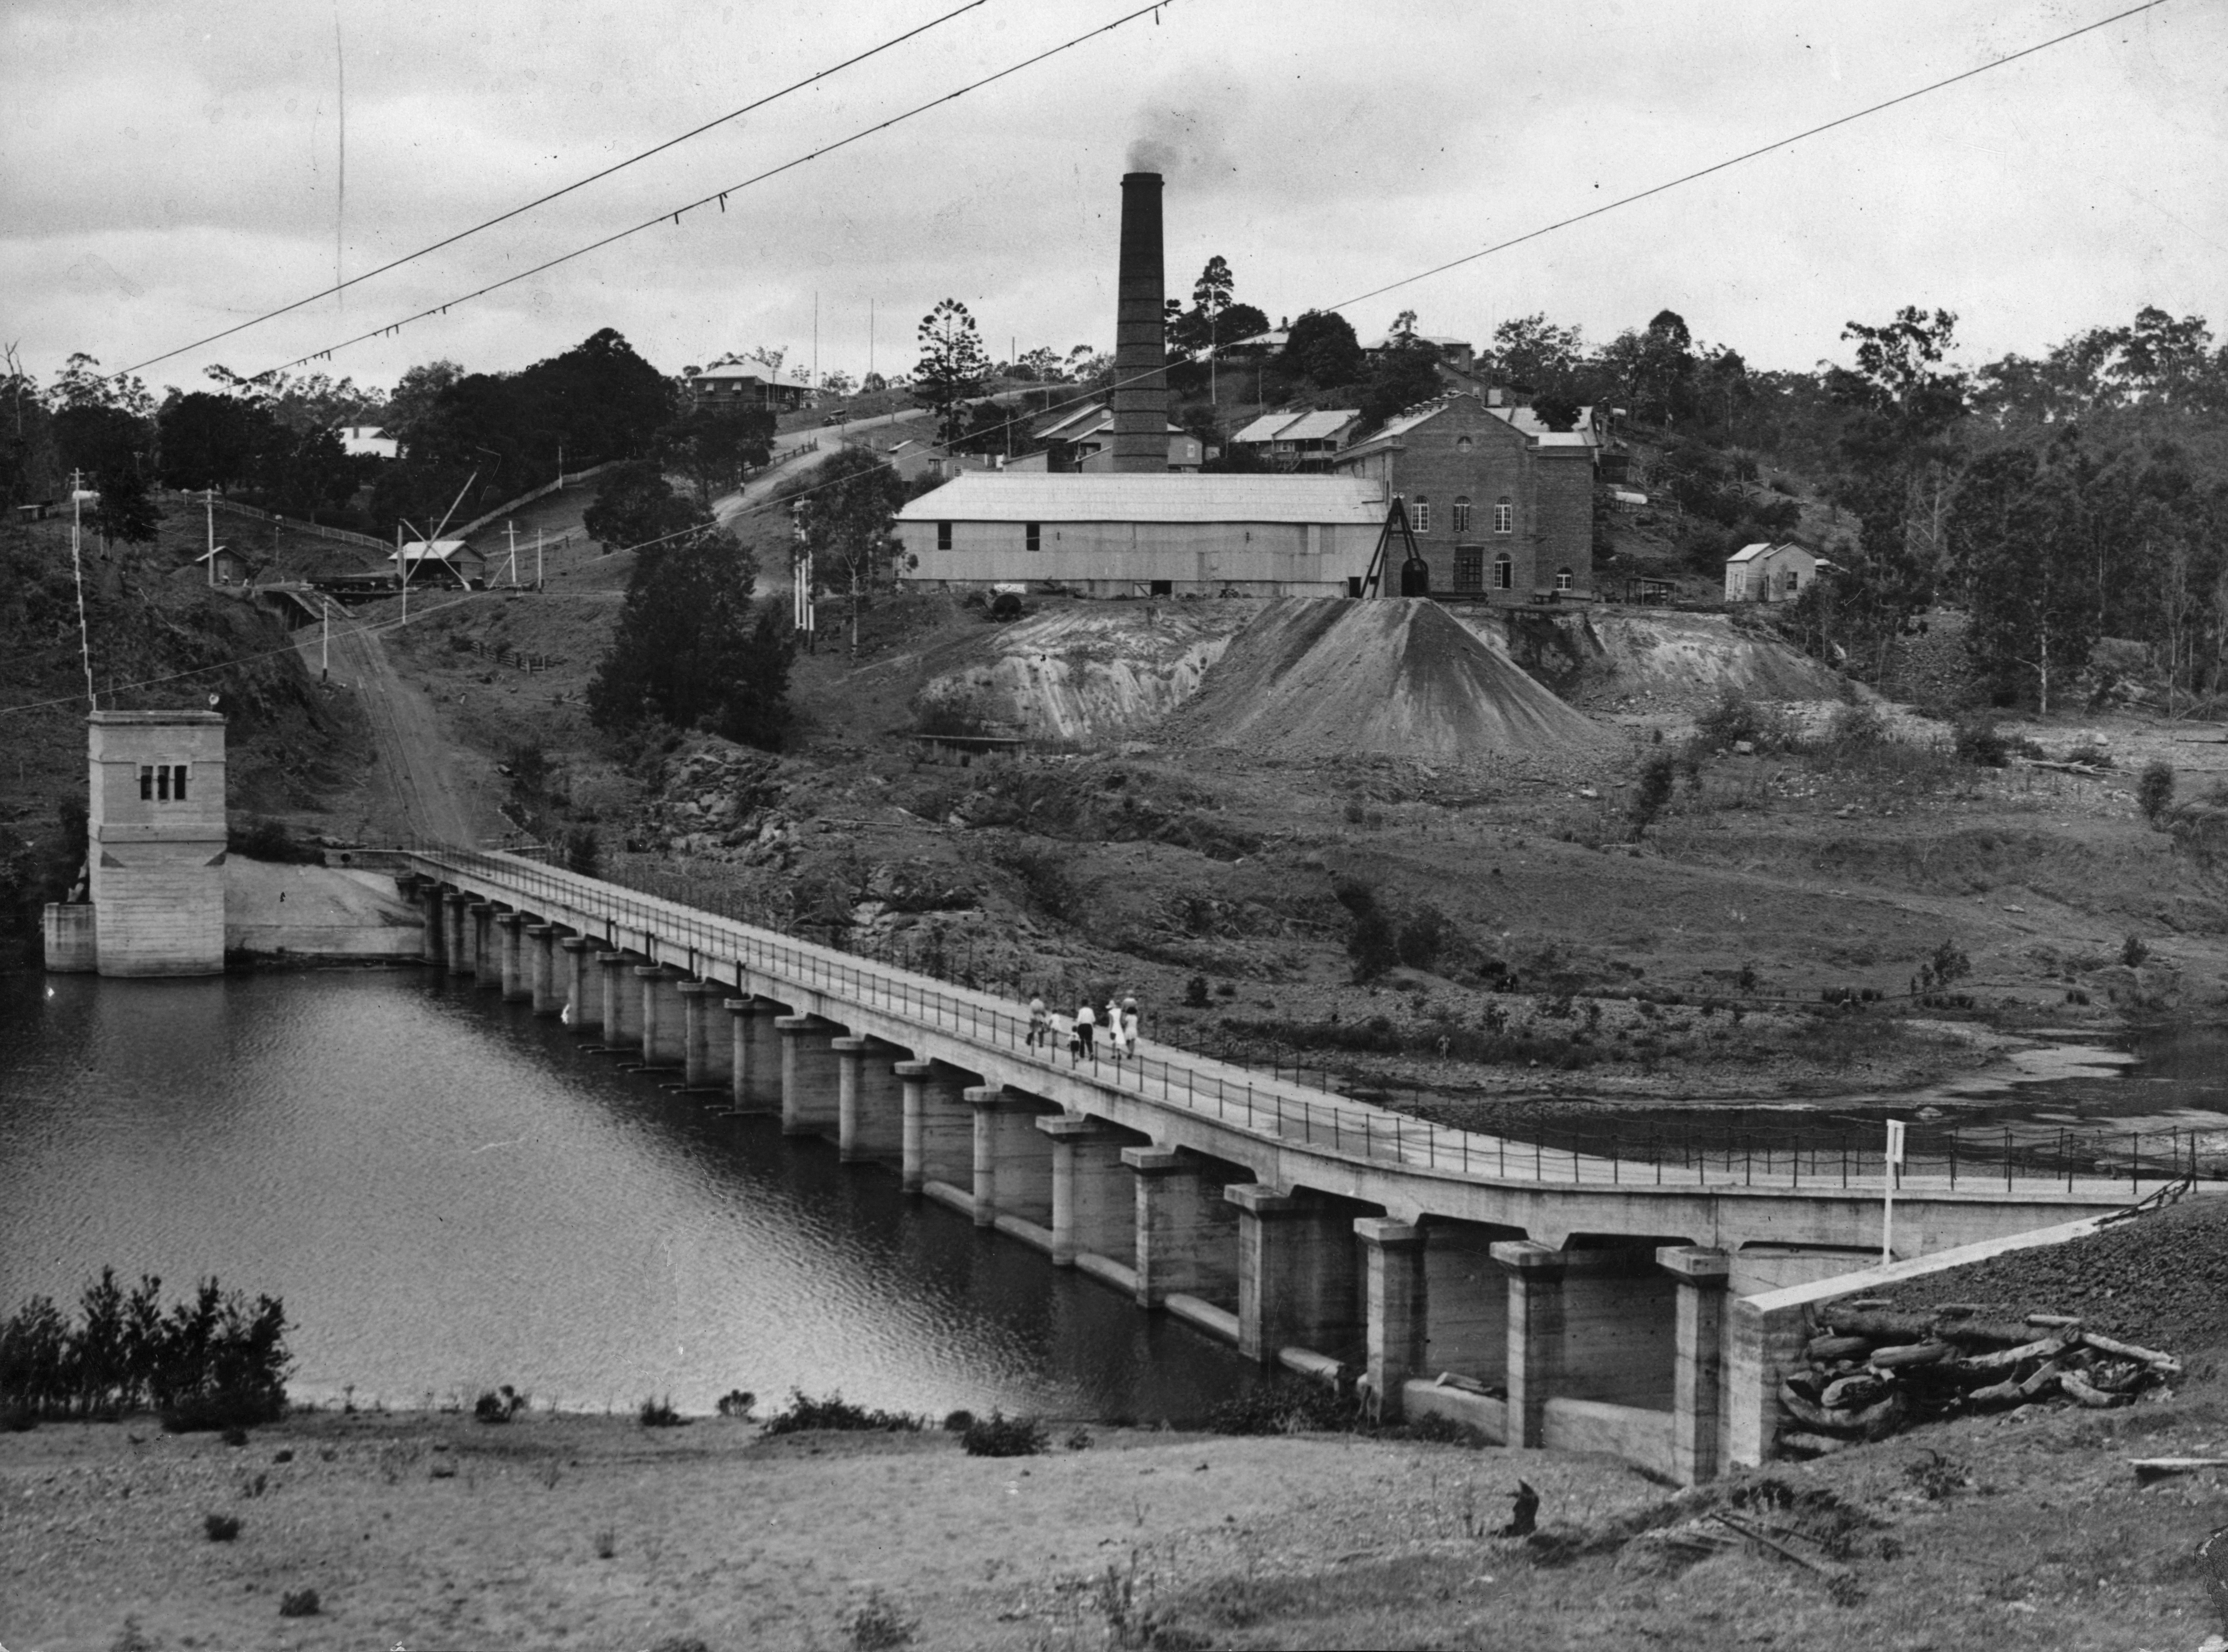 This is a historical image of the Pumping Station and Weir at Mount Crosby, Brisbane, Ca. 1934.